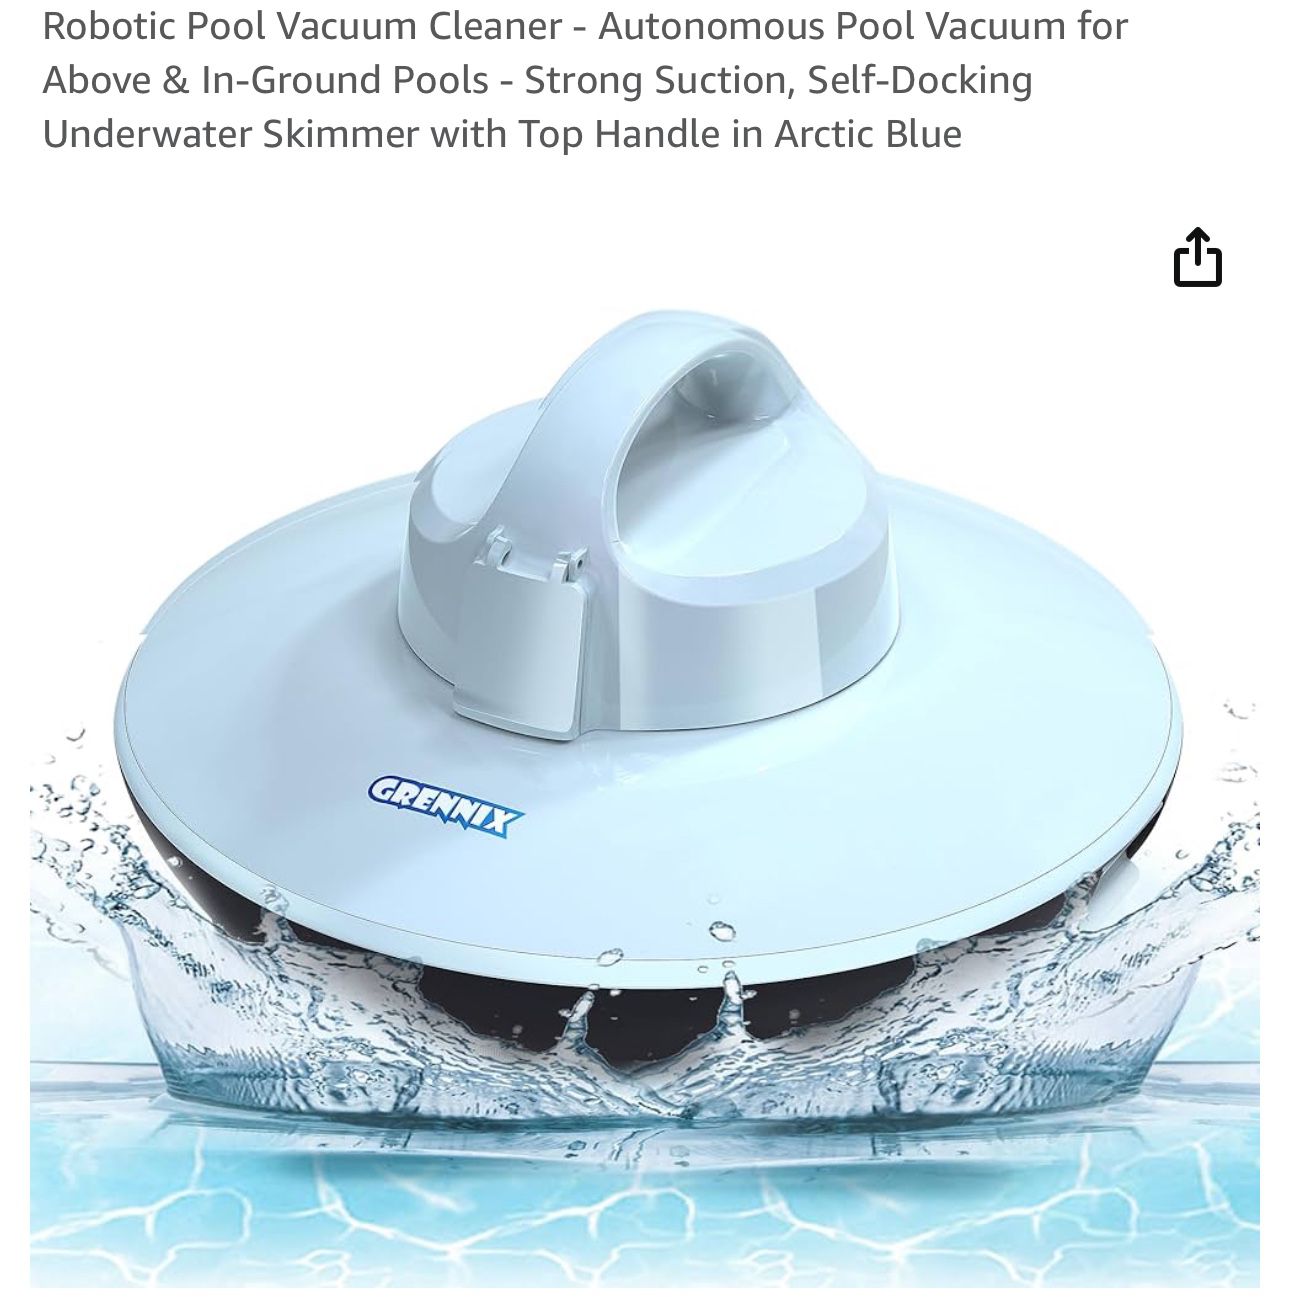 Robotic Pool Vacuum Cleaner - Autonomous Pool Vacuum for Above & In-Ground Pools - Strong Suction, Self-Docking Underwater Skimmer with Top Handle in 